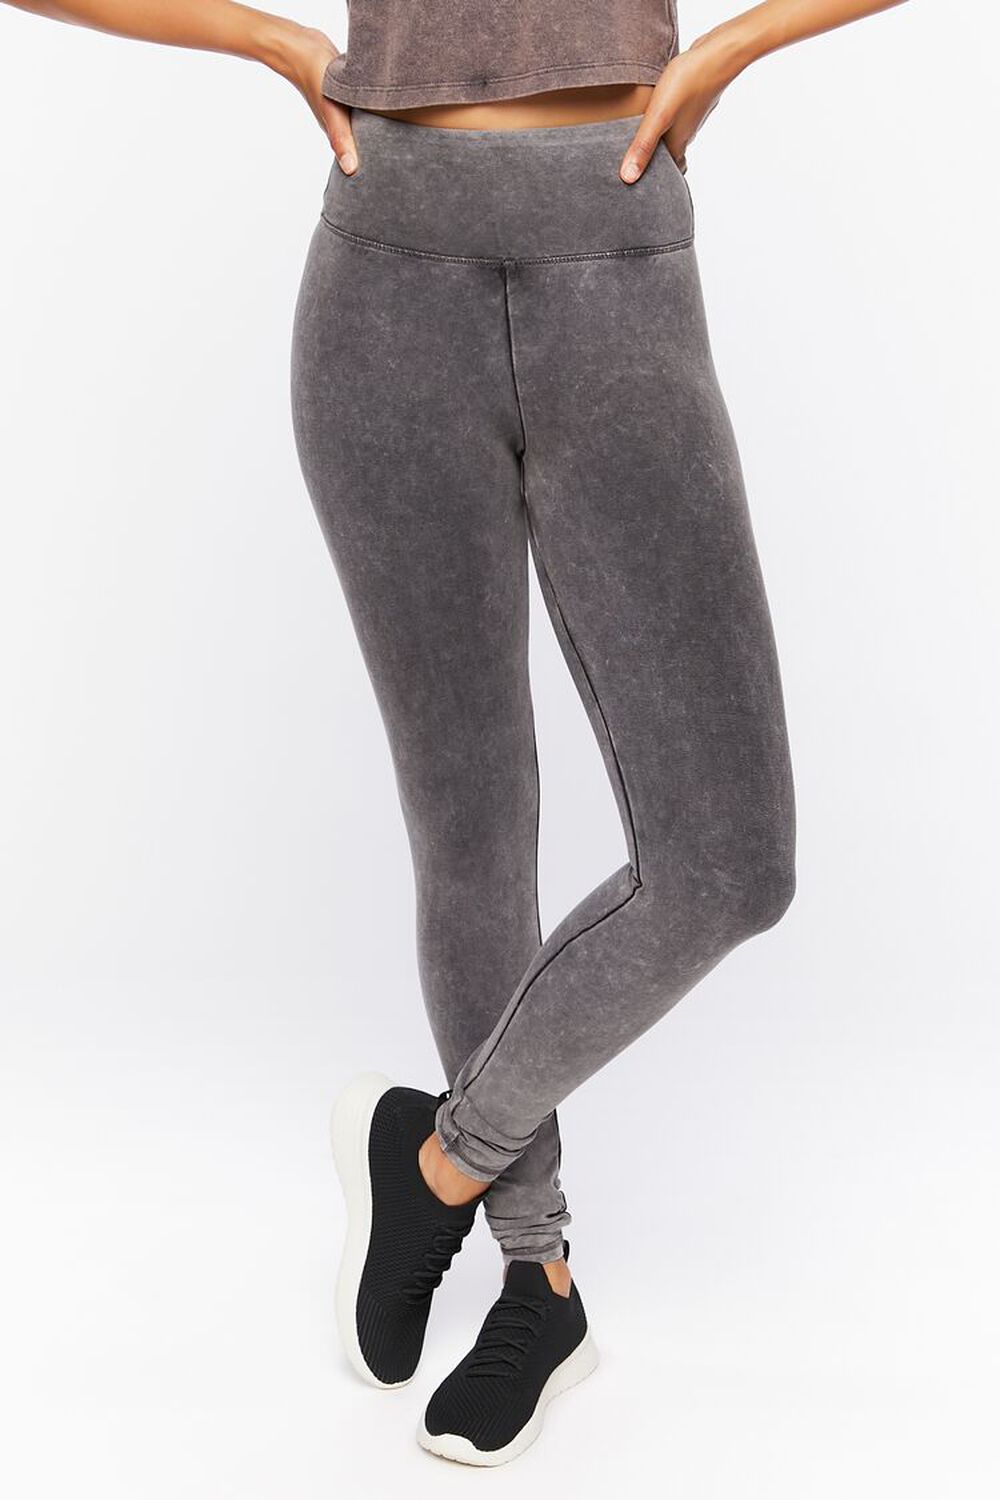 CHARCOAL Active Mineral Wash Leggings, image 2